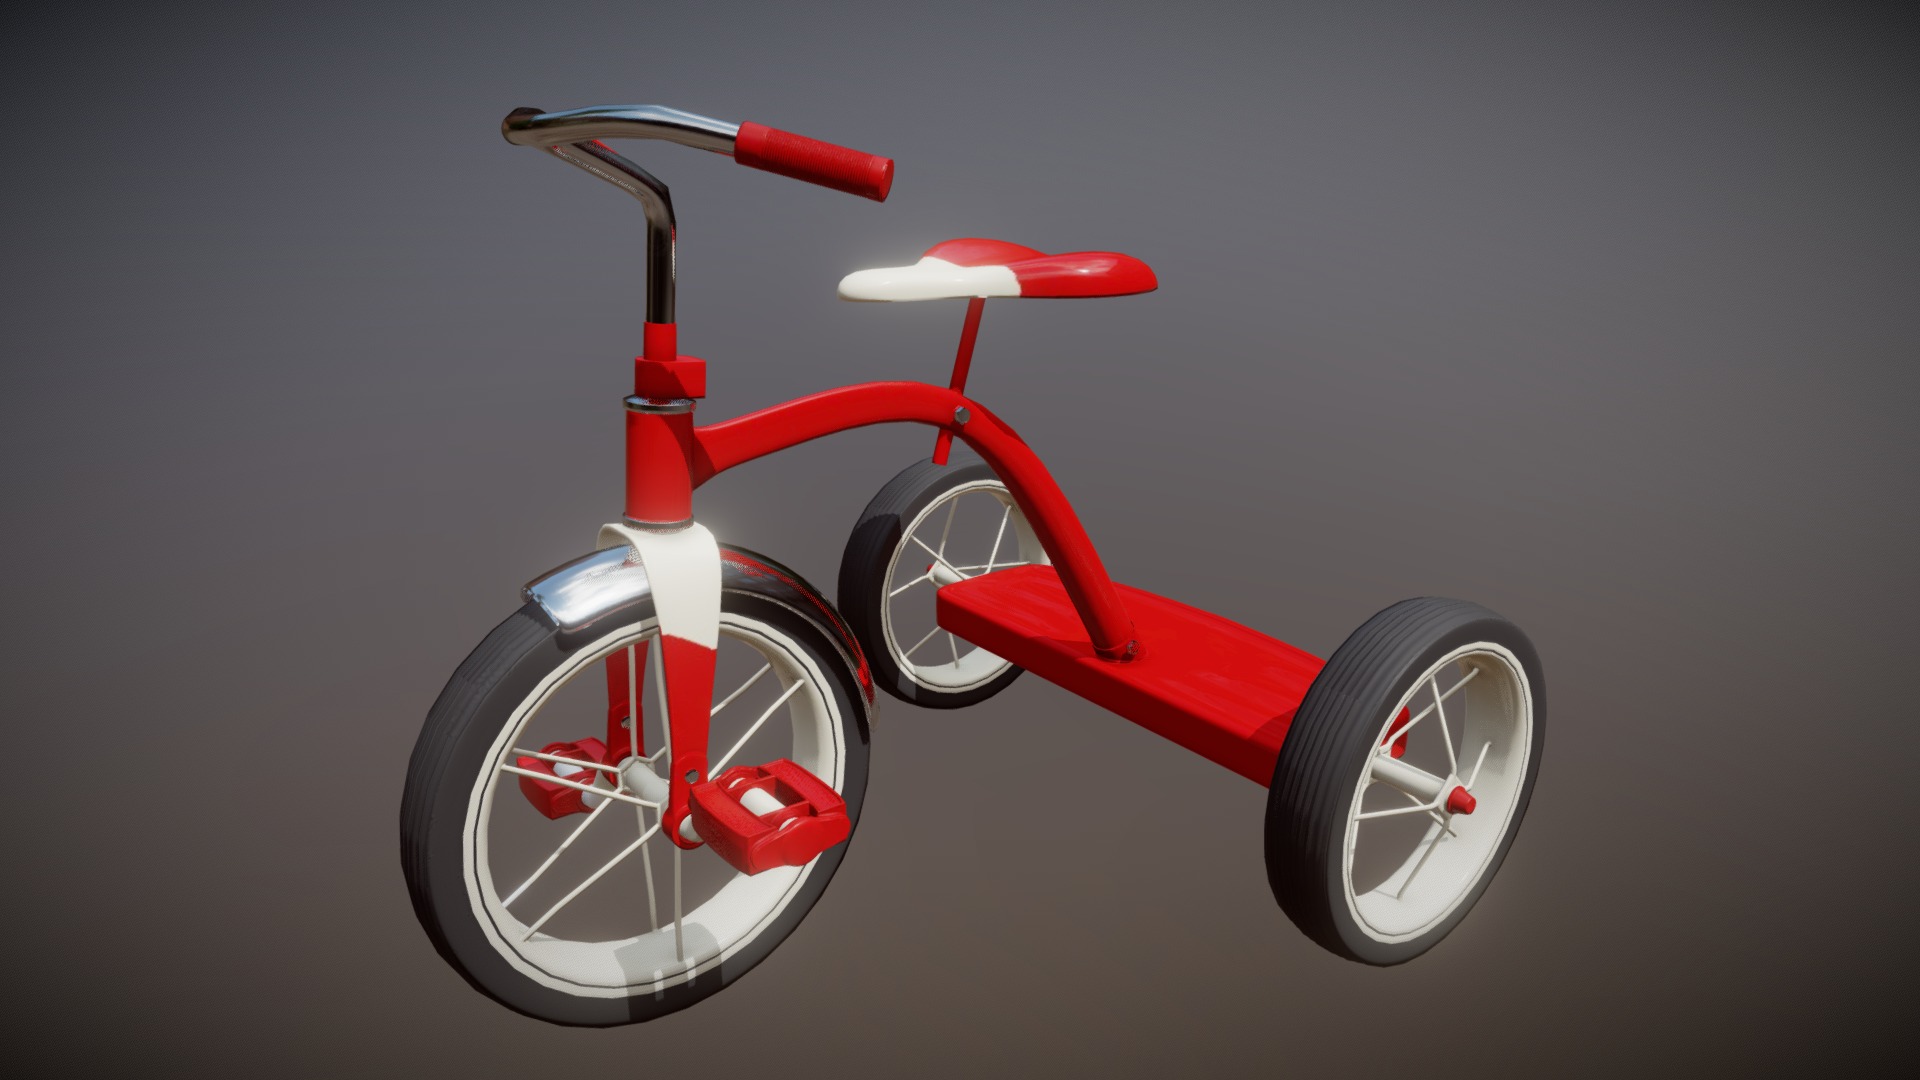 3D model Tricycle - This is a 3D model of the Tricycle. The 3D model is about a red and white bicycle.